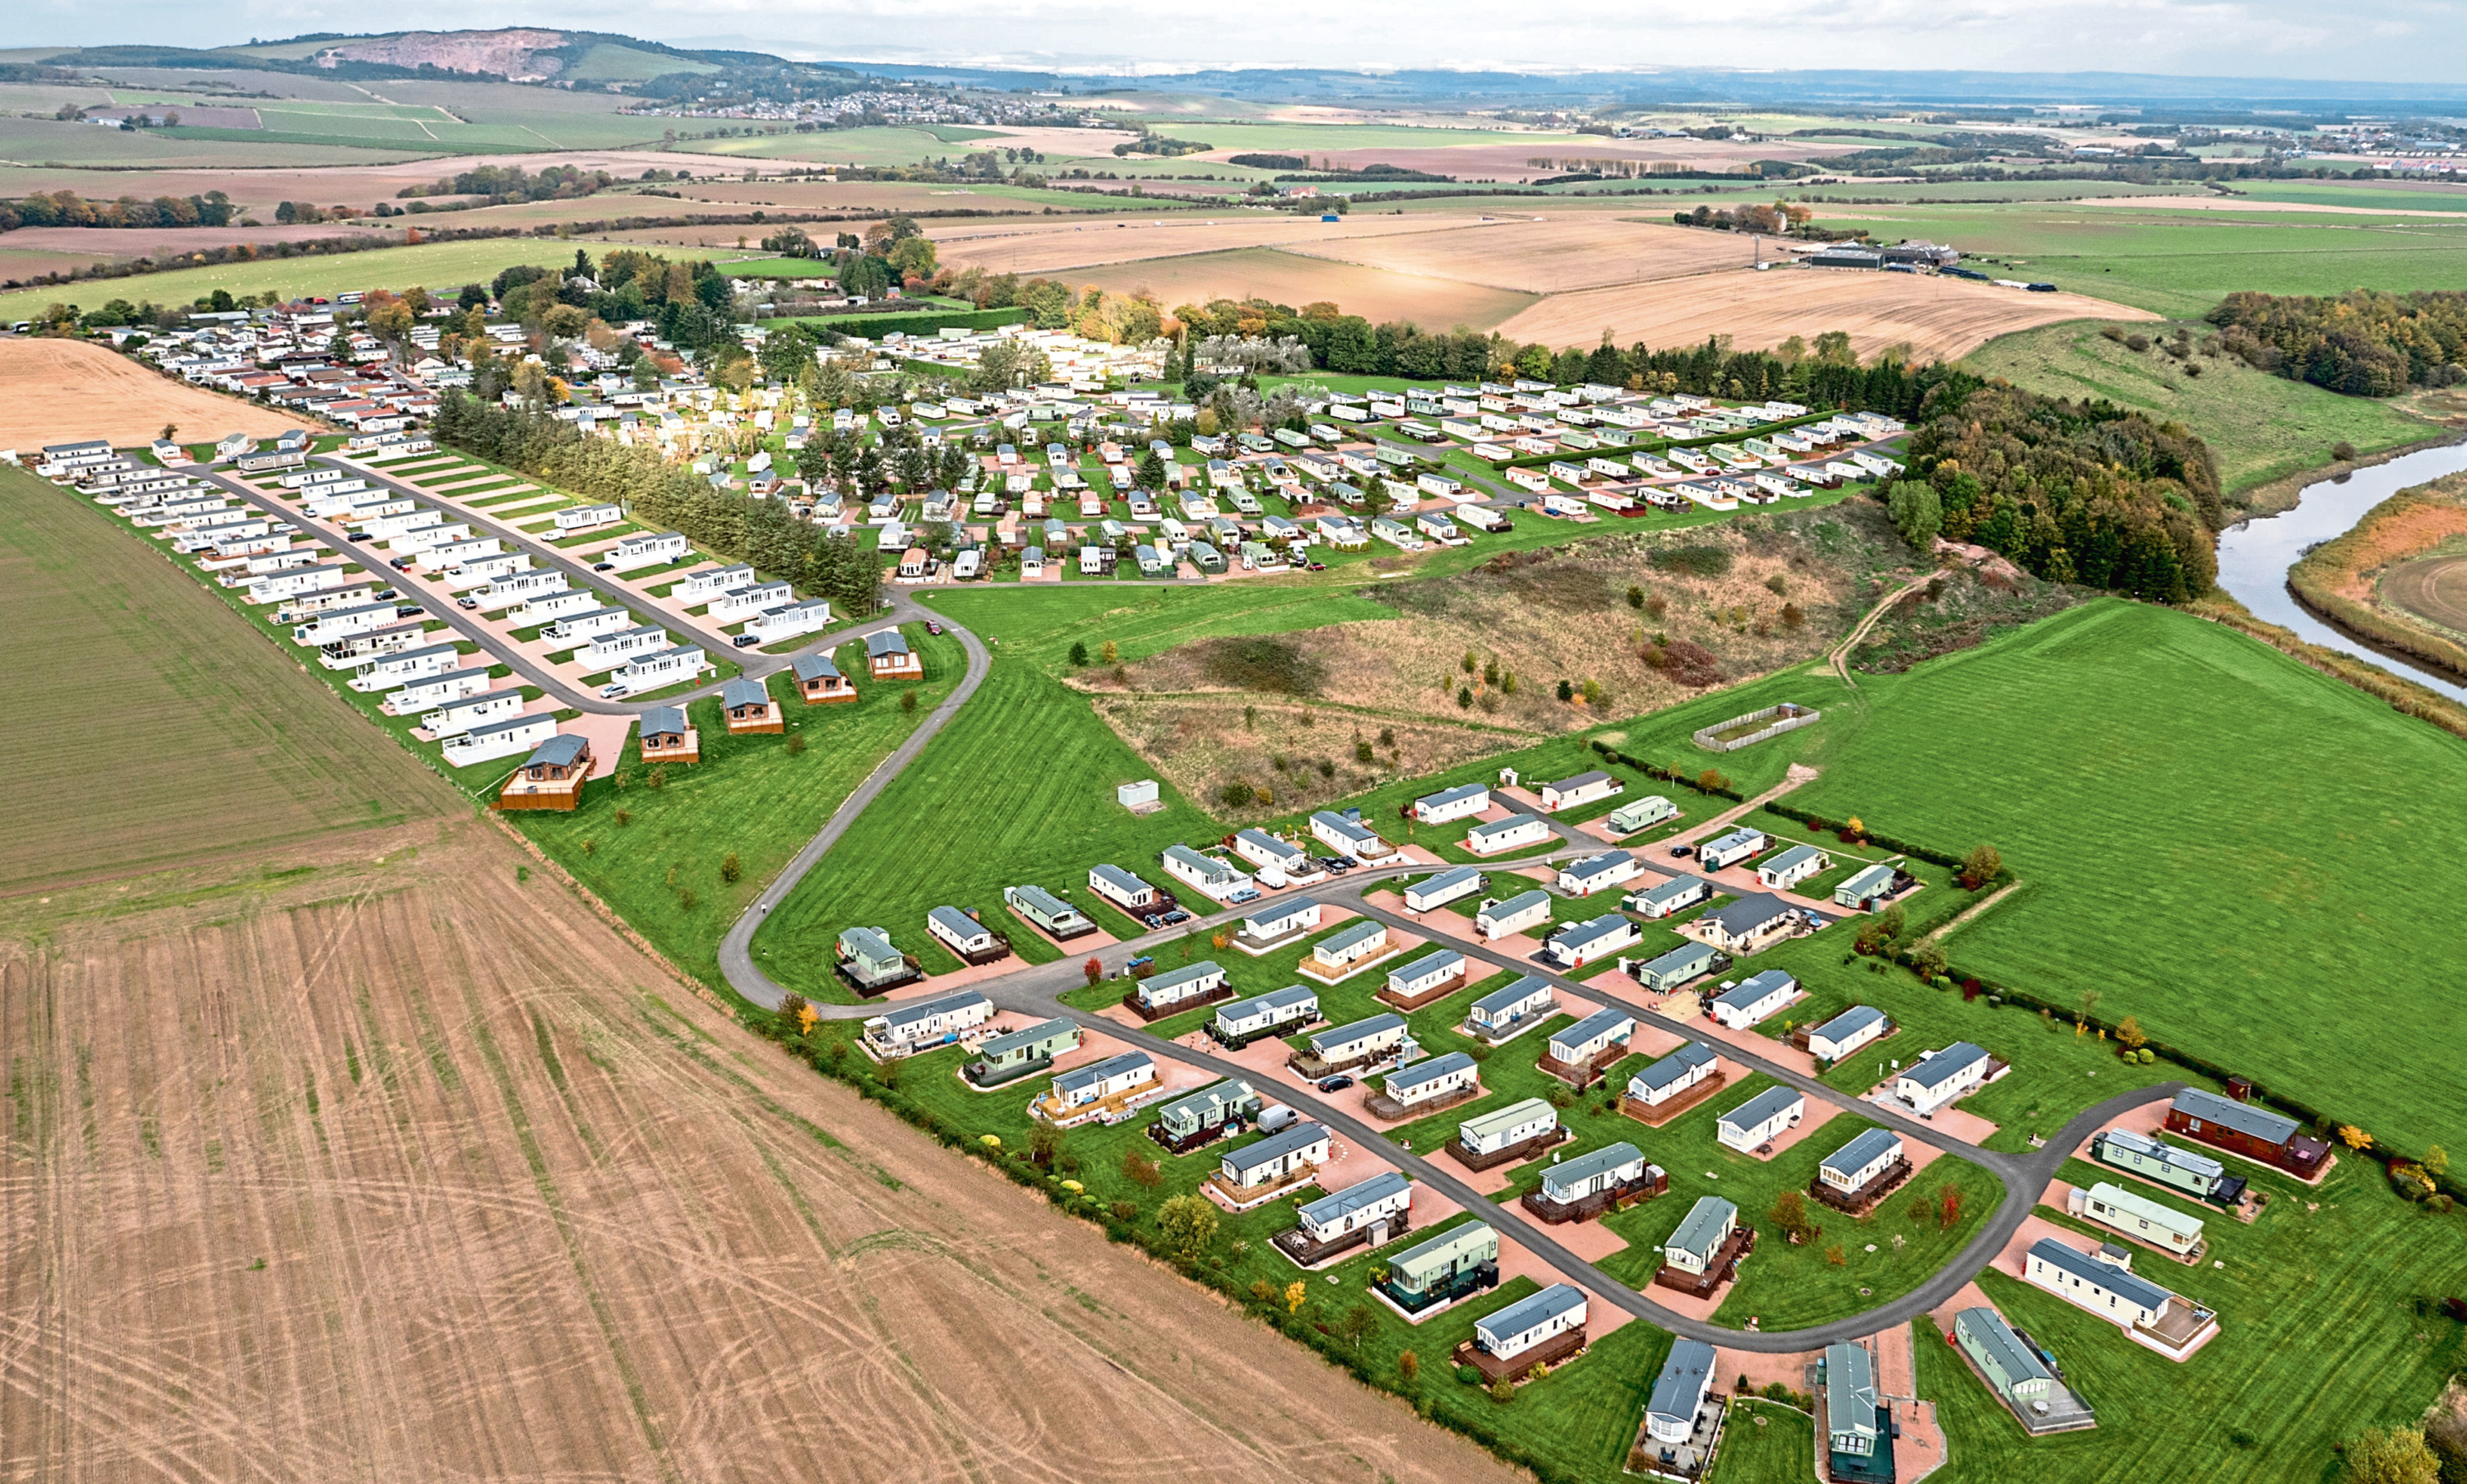 An aerial view of Clayton Caravan Park where a £2 million leisure complex is being constructed.